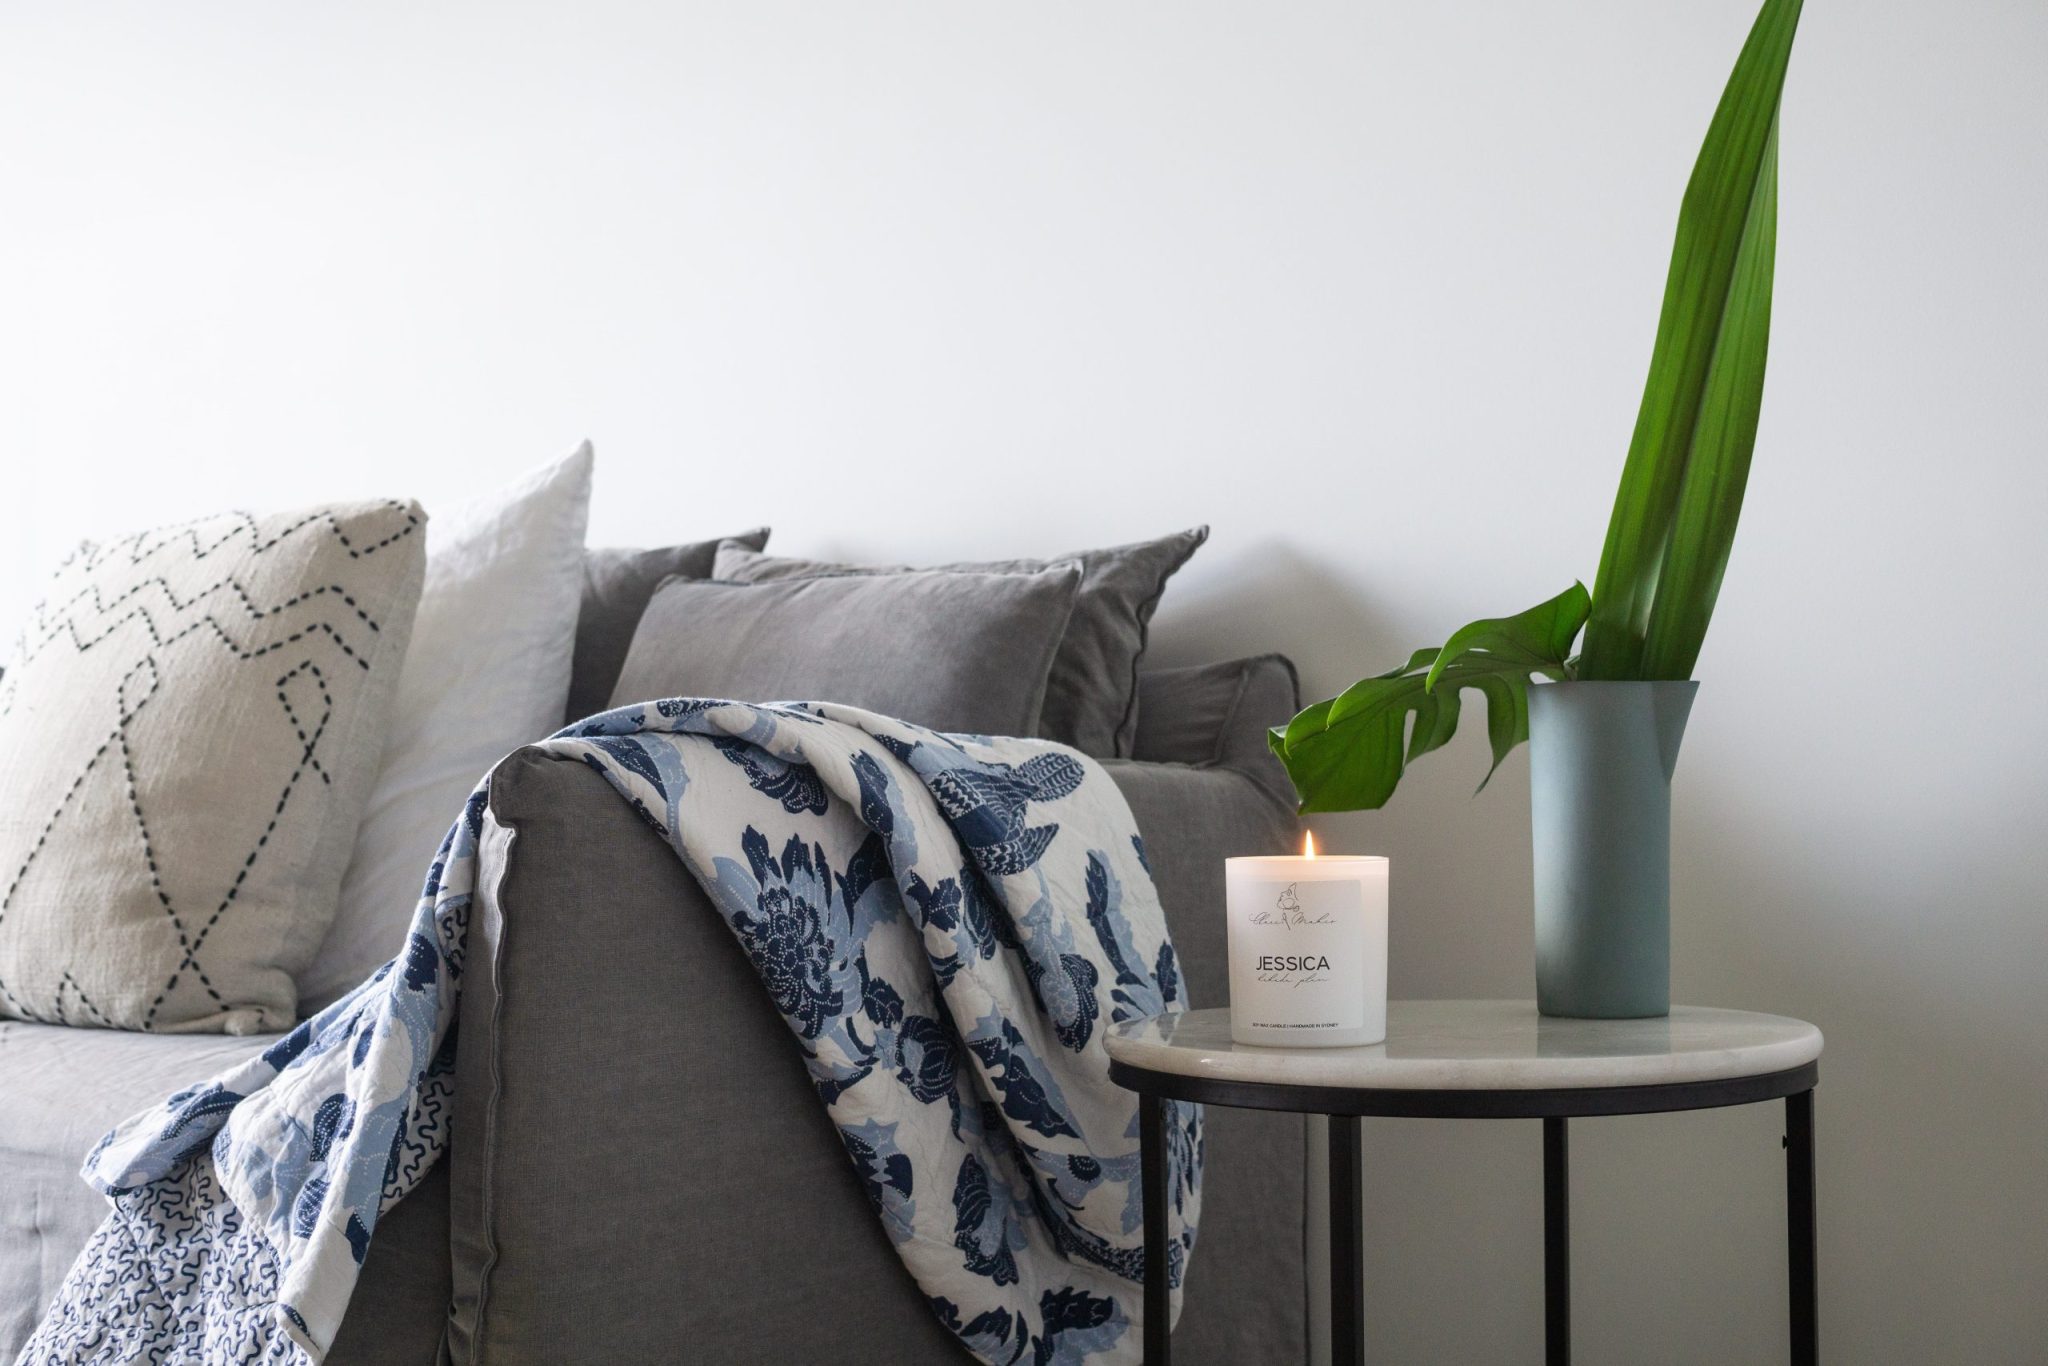 Couch with throw pillows, throw blanket, side table, lit candle, and plant.